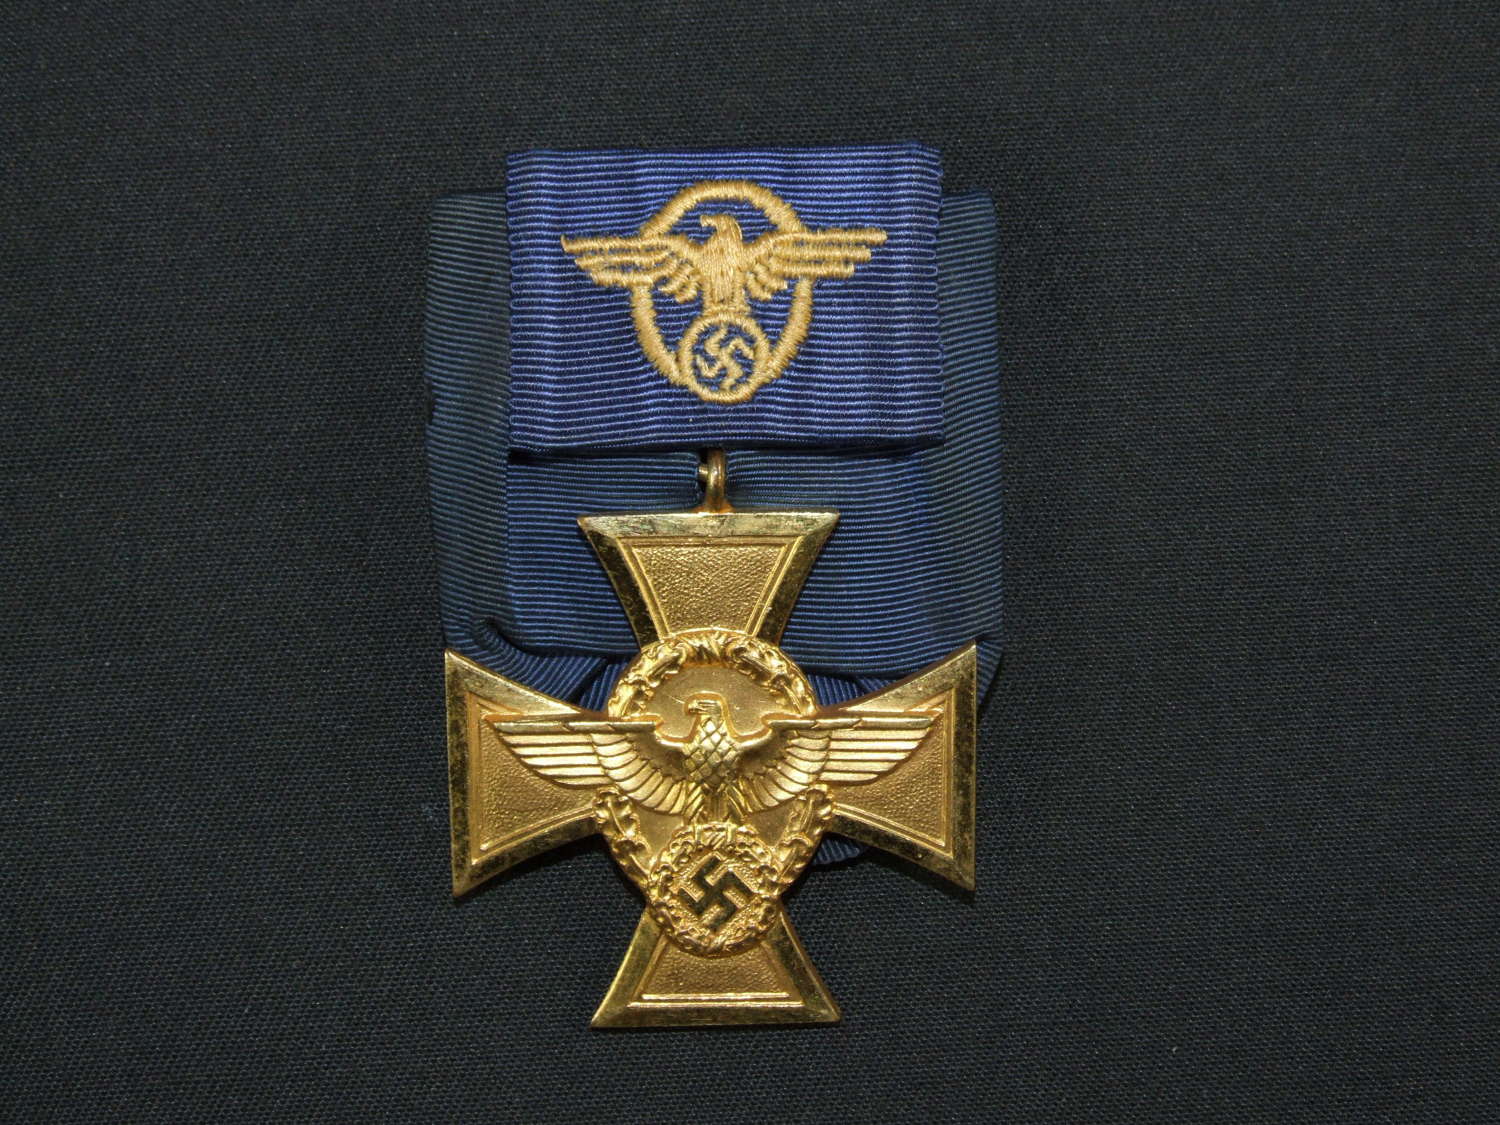 Ordnungspolizei Police Long Service Cross, Ist Class For 25 Years